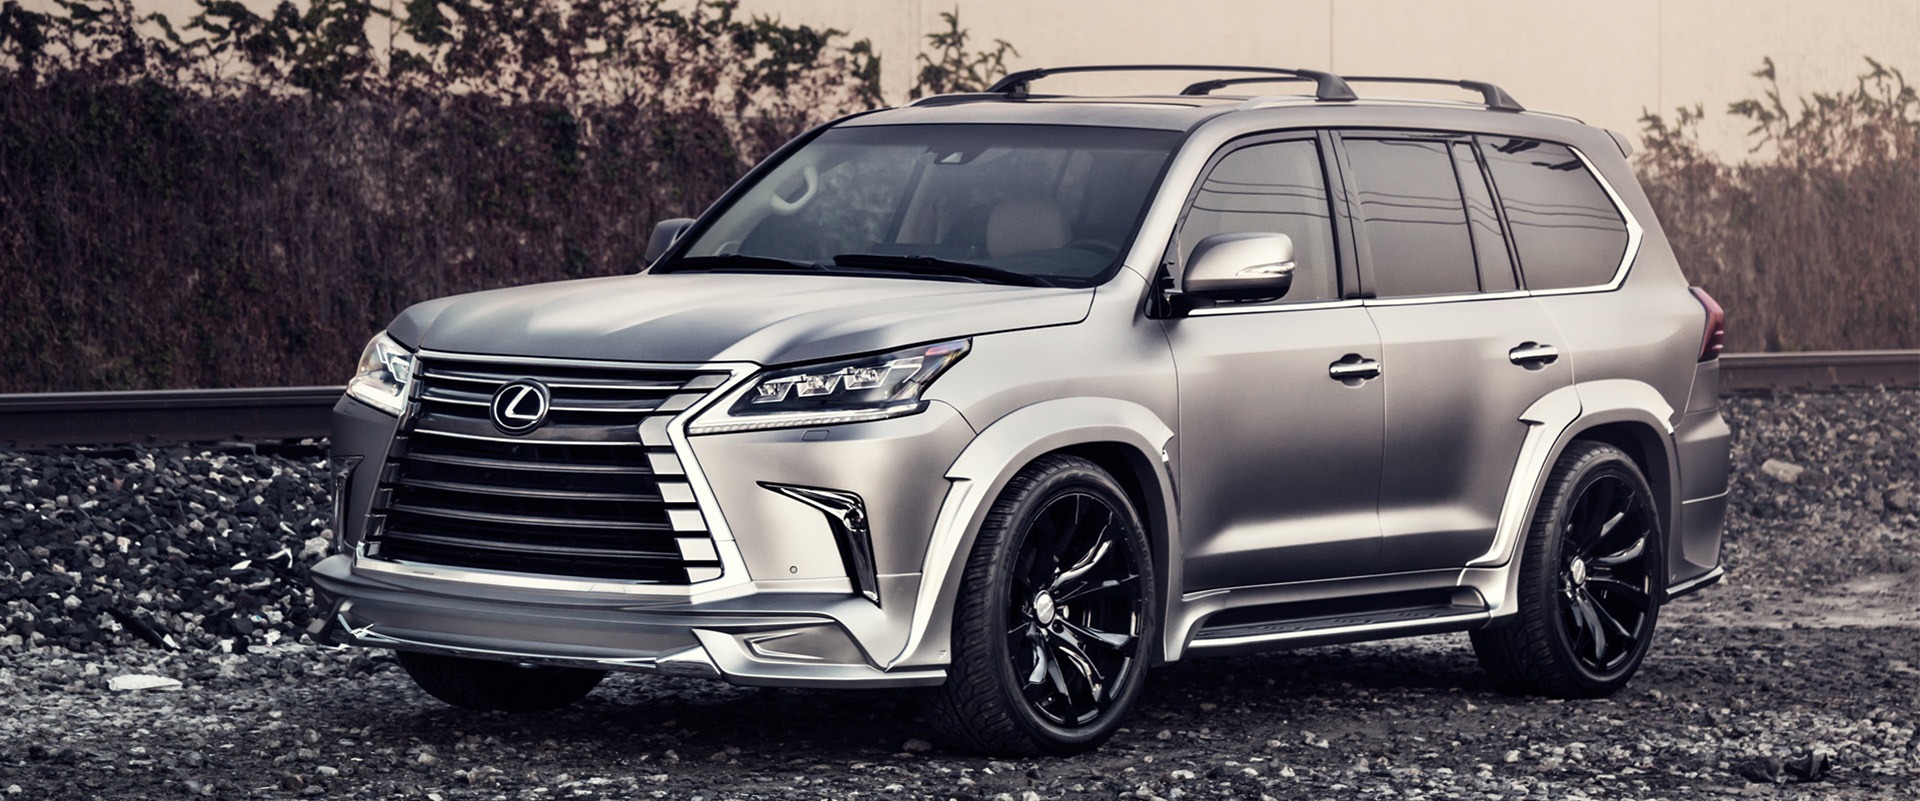 wald lexus lx570 home page banner